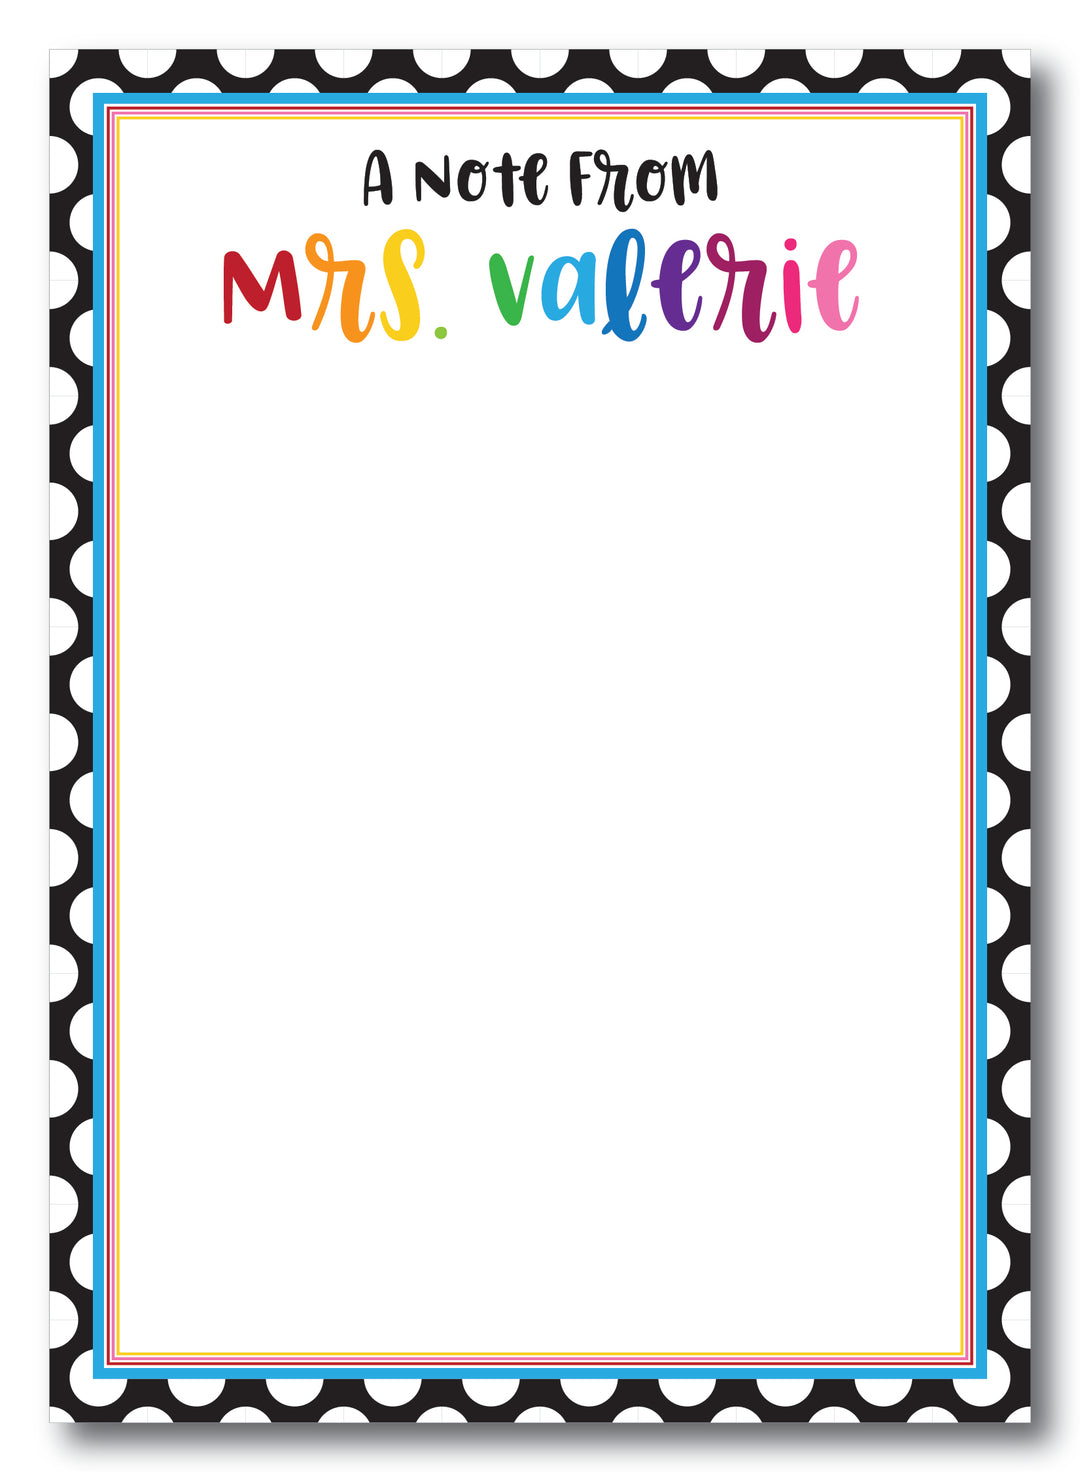 The Mrs. Valerie Notepad